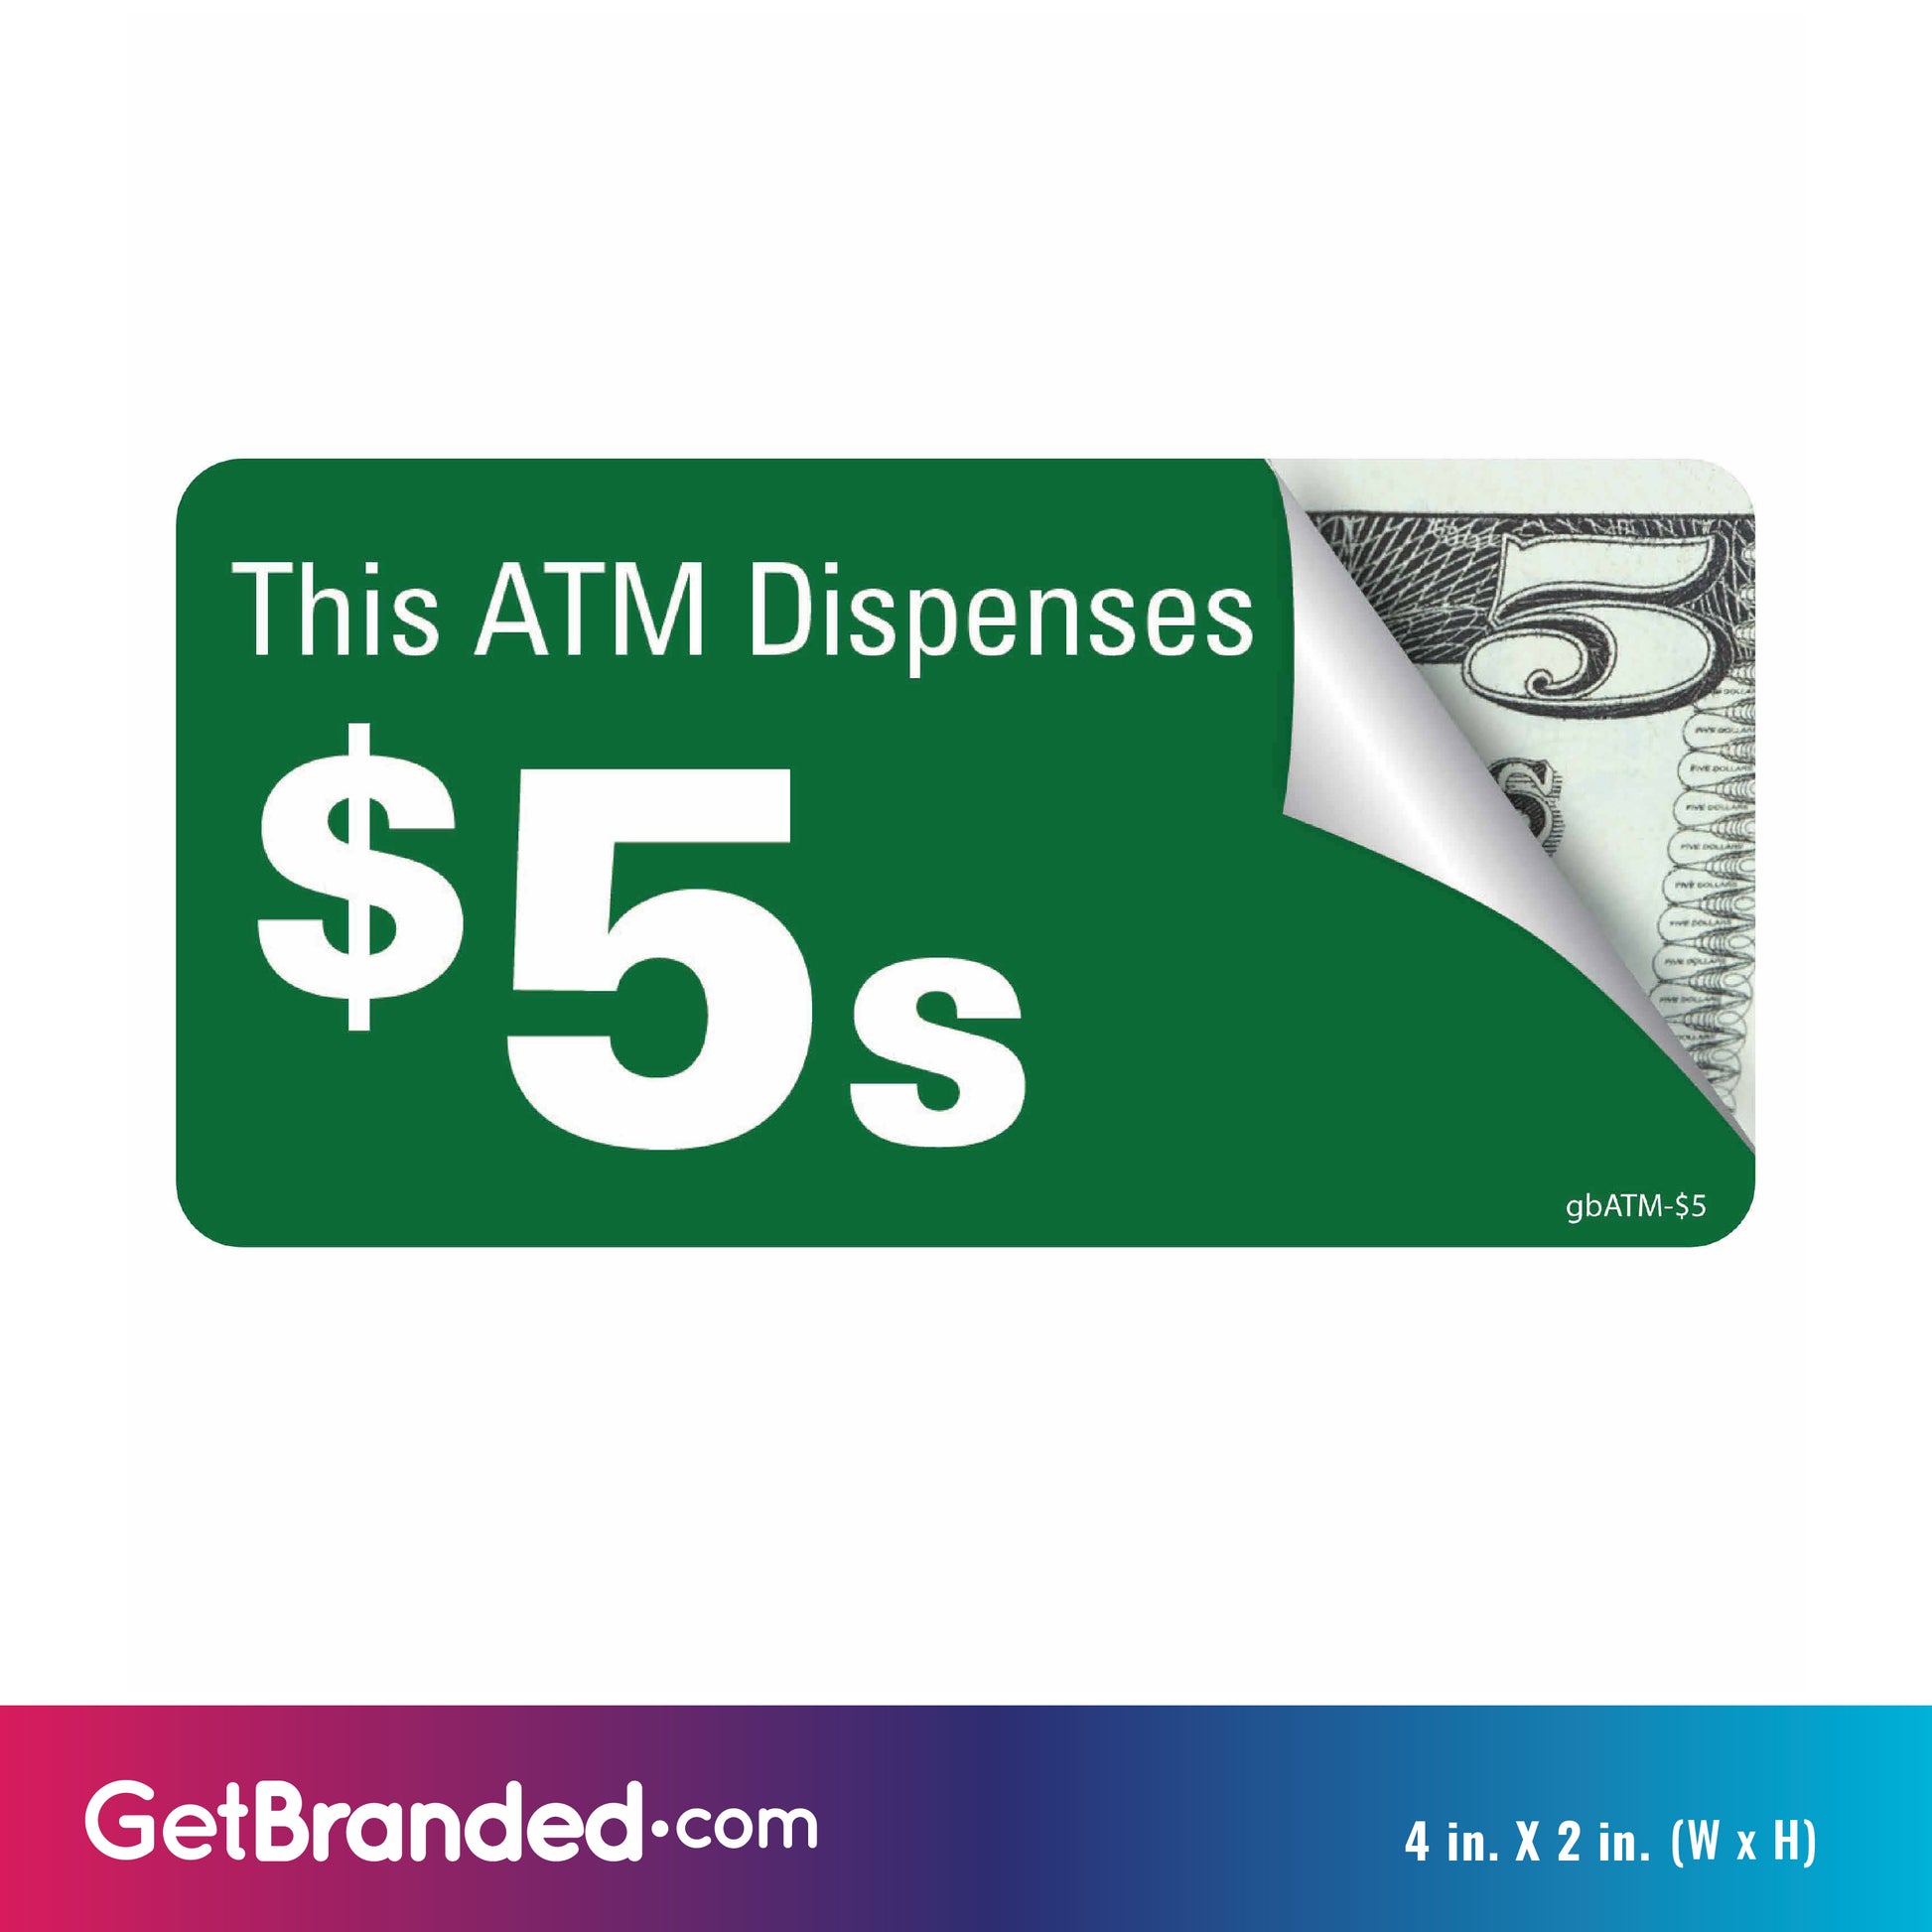 Pro ATM Dispense $5's Decal size guide. 4 inches by 2 inches in size.